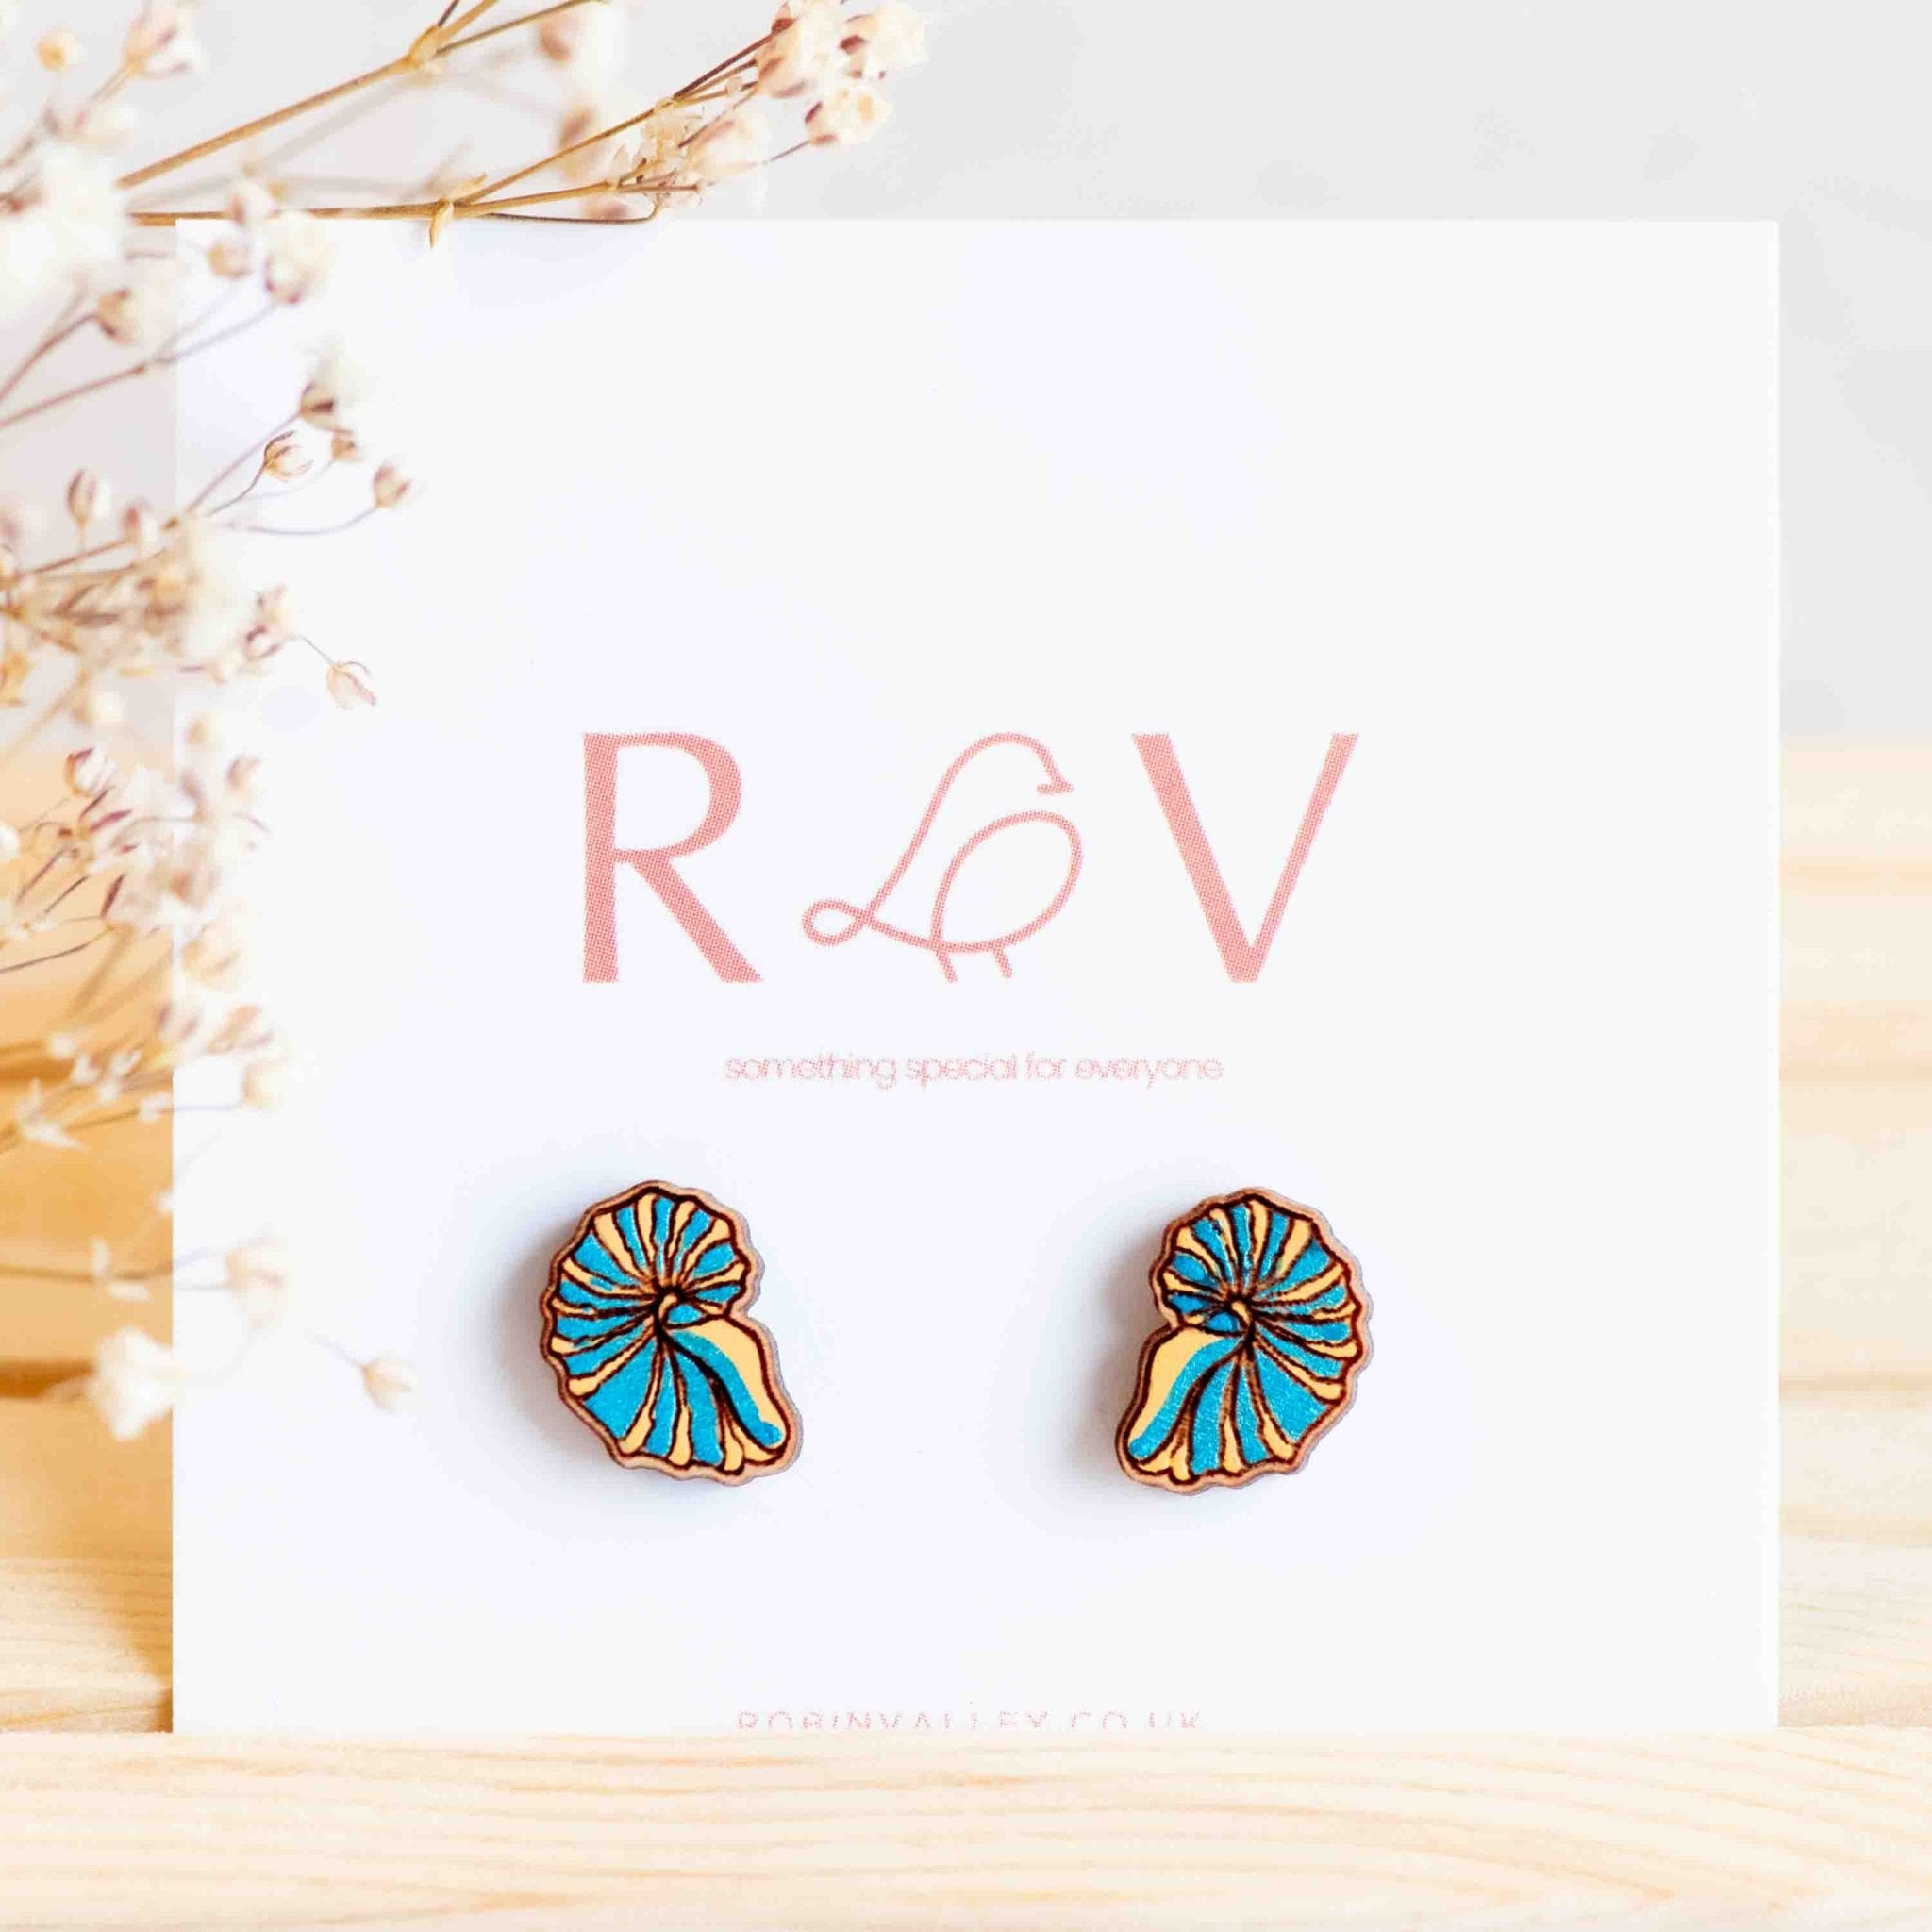 Hand-painted Blue Shell Cherry Wood Stud Earrings - PES13053 - Robin Valley Official Store